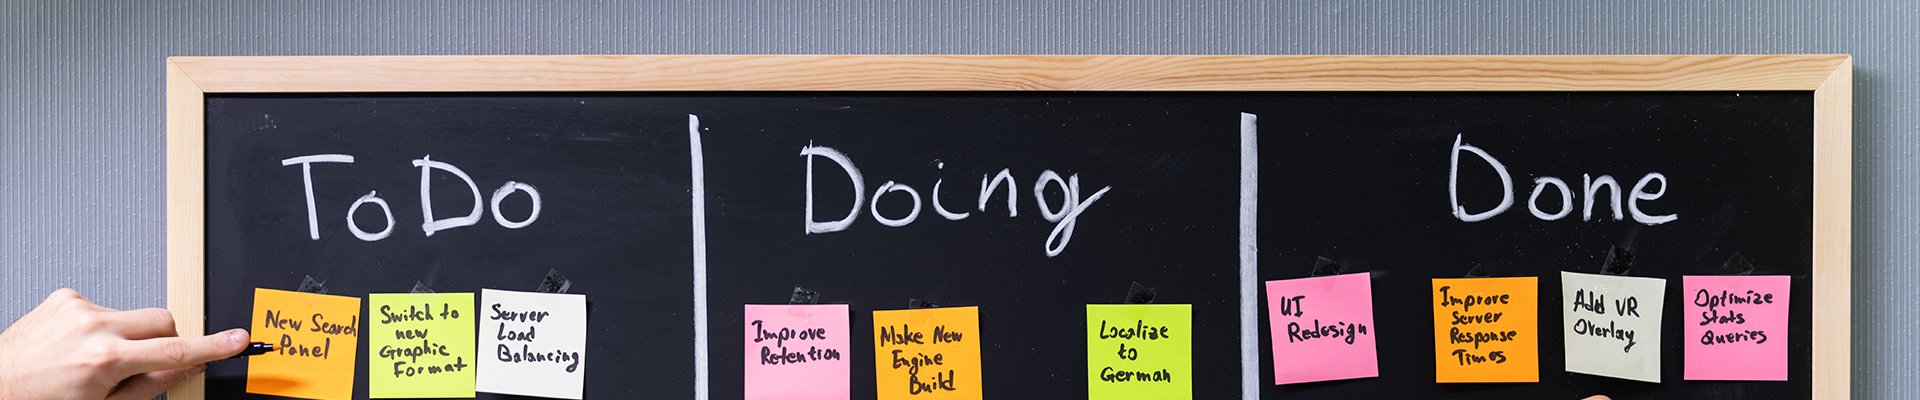 Header image of a blackboard divided into typical sprint sessions with sticky notes: To Do, Doing, Done